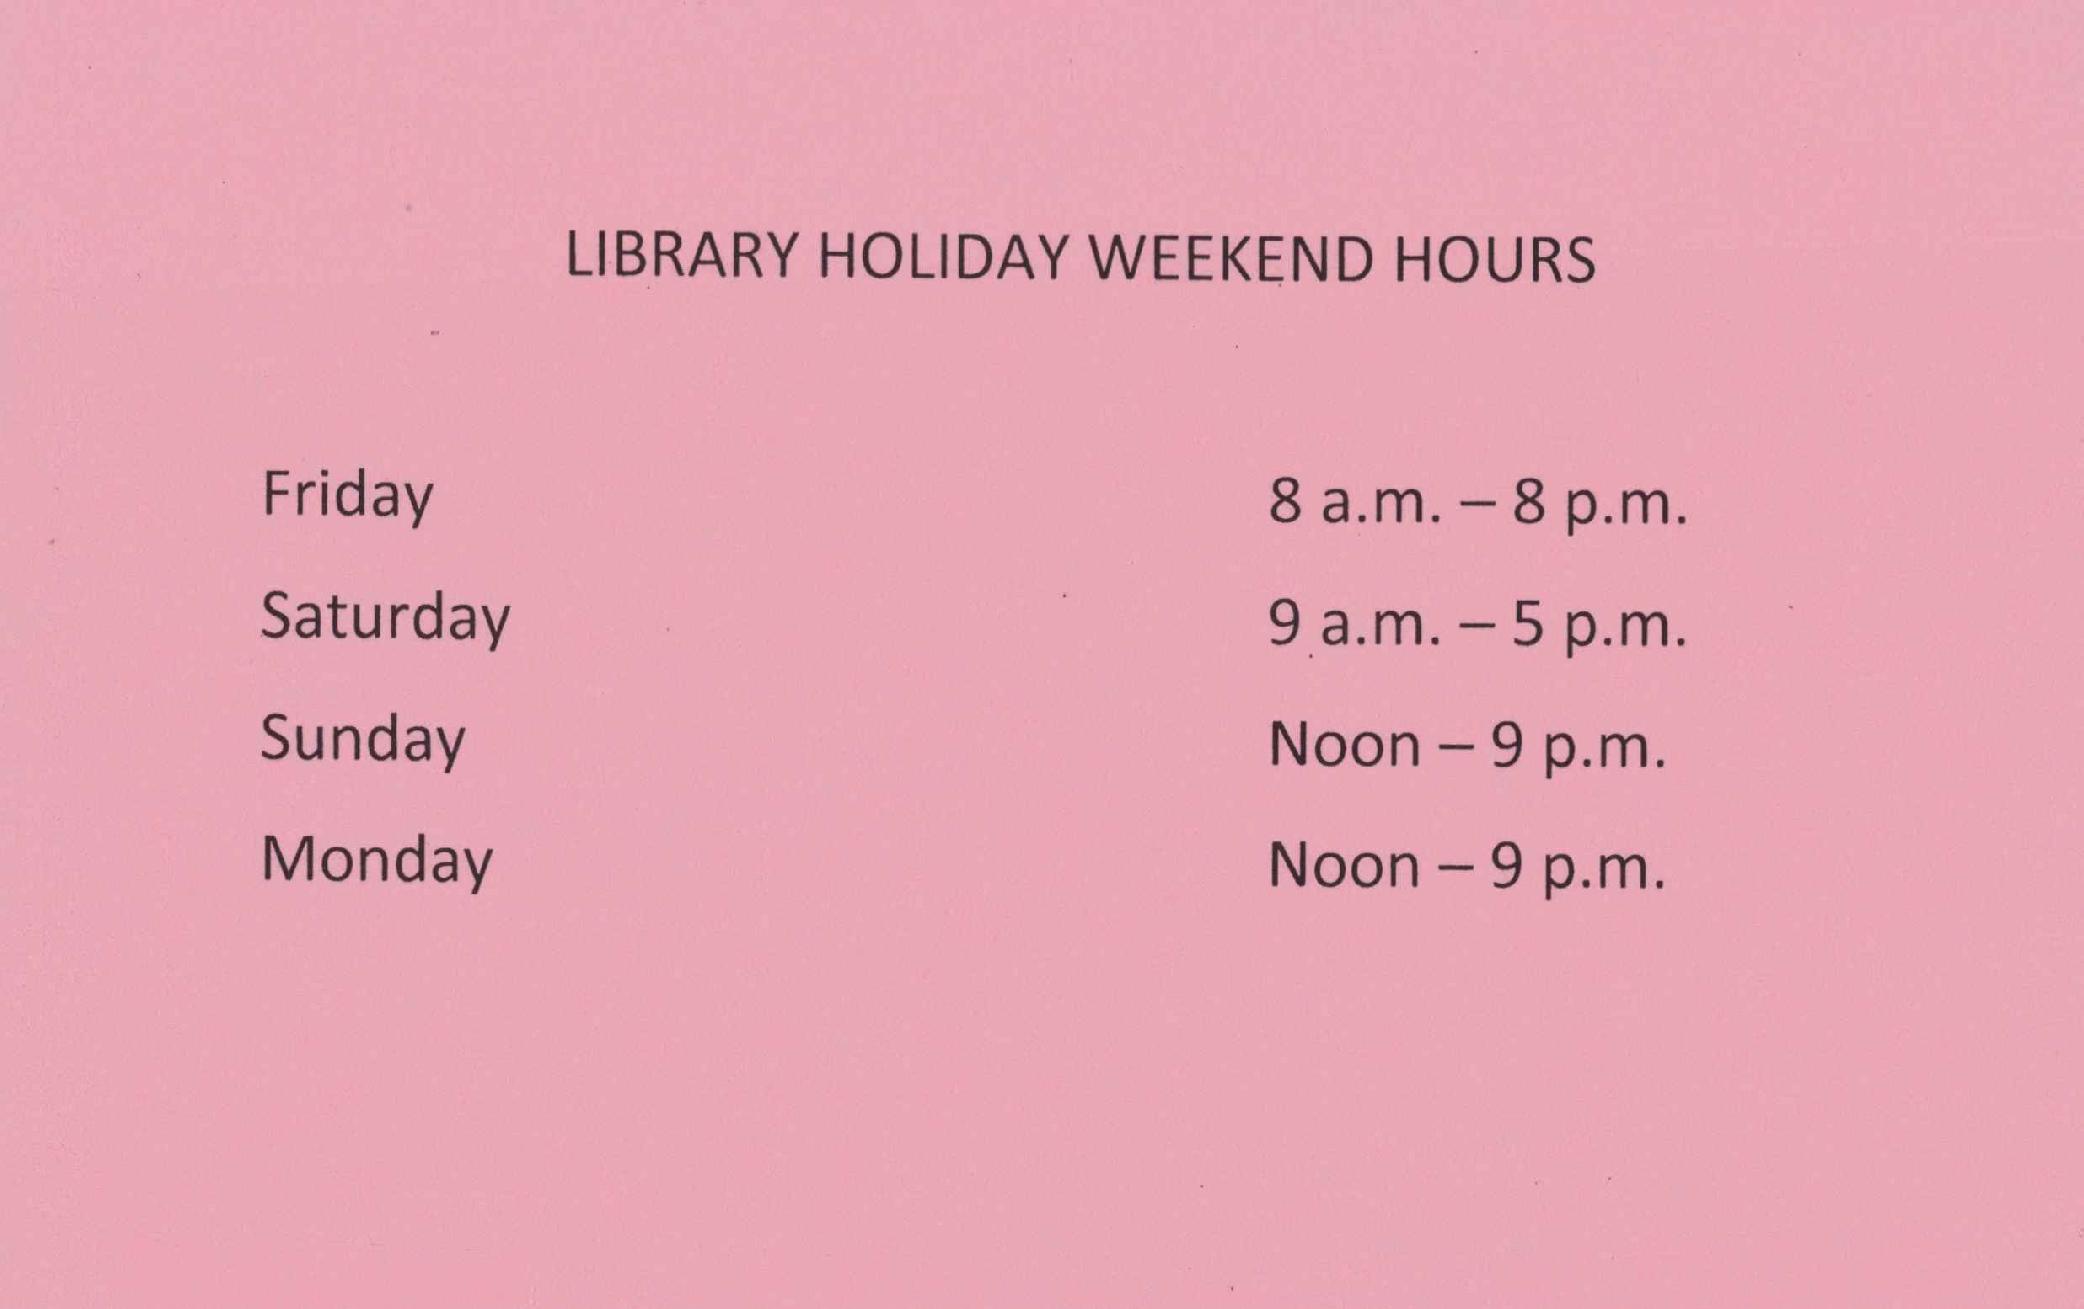 Library hours of Patriots' Day are 12PM-9PM